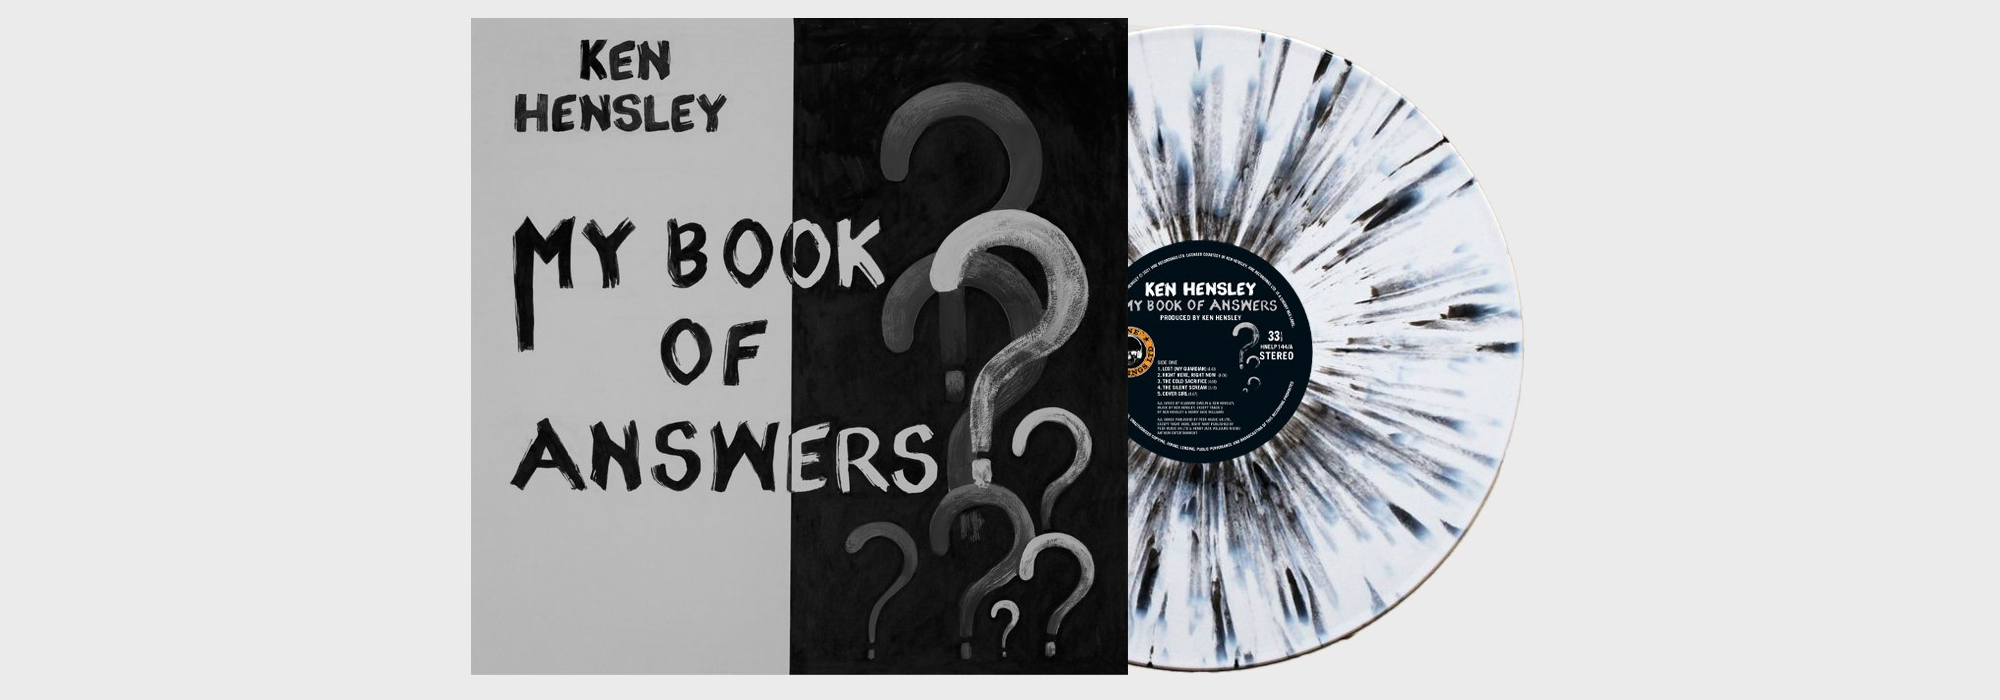 my book of answers album vinyl cover image